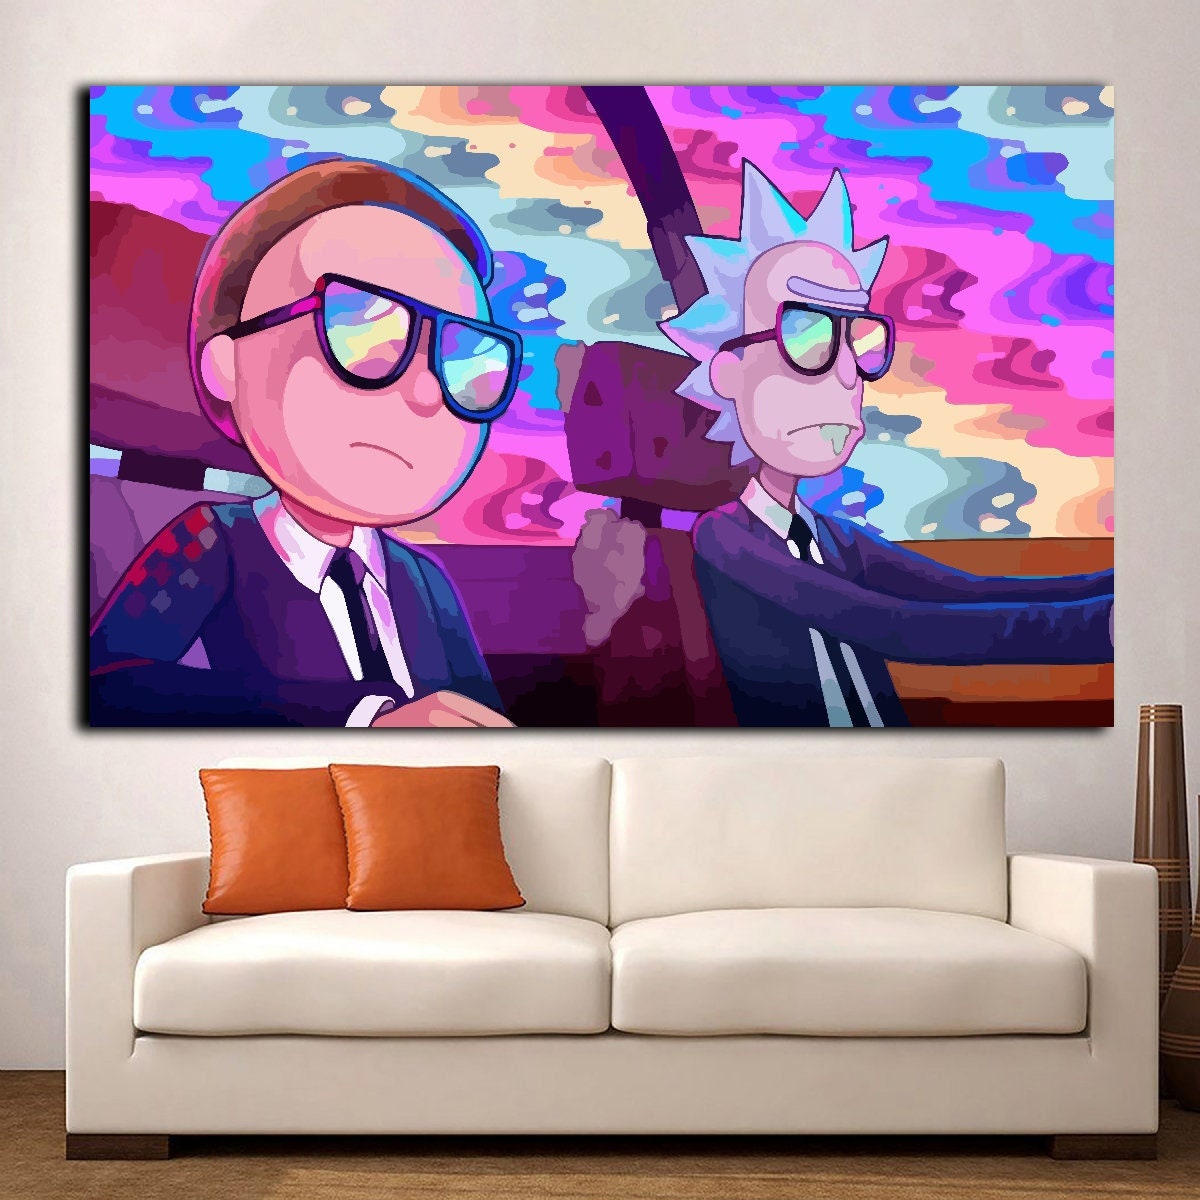 Rick and Morty  Painting, Diamond painting, Rick and morty